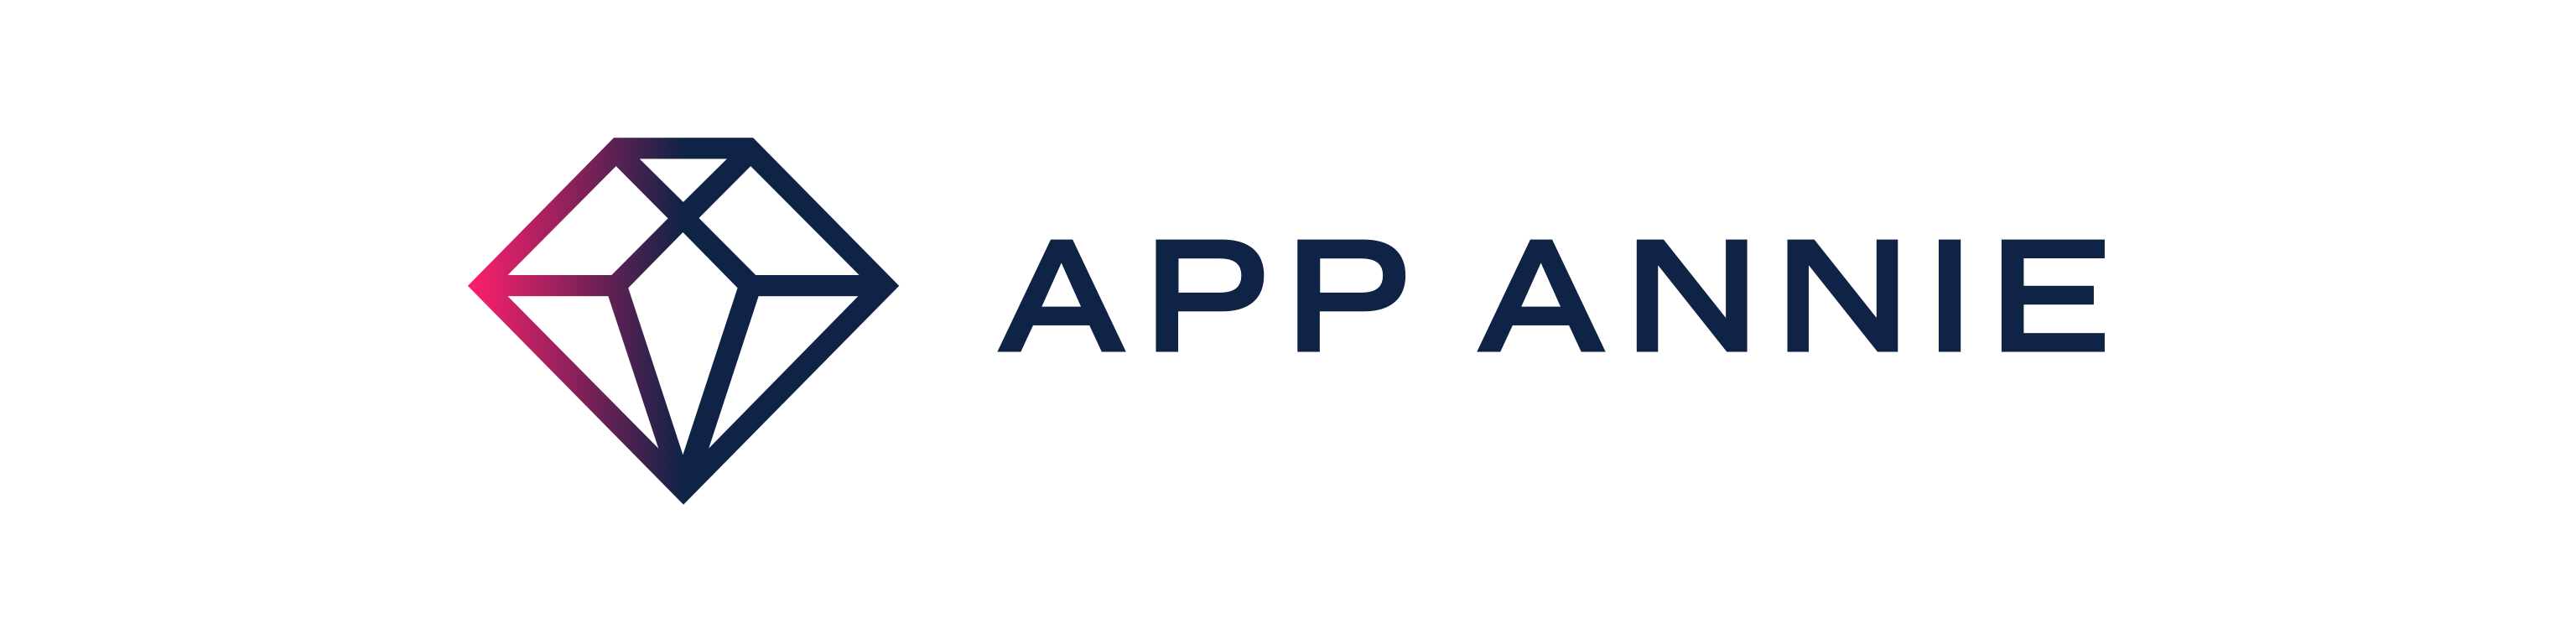 Finance App Downloads Spike 15% to 4.6 Billion in 2020, Amid Year of Intense Economic Uncertainty Says New Report from Liftoff and App Annie